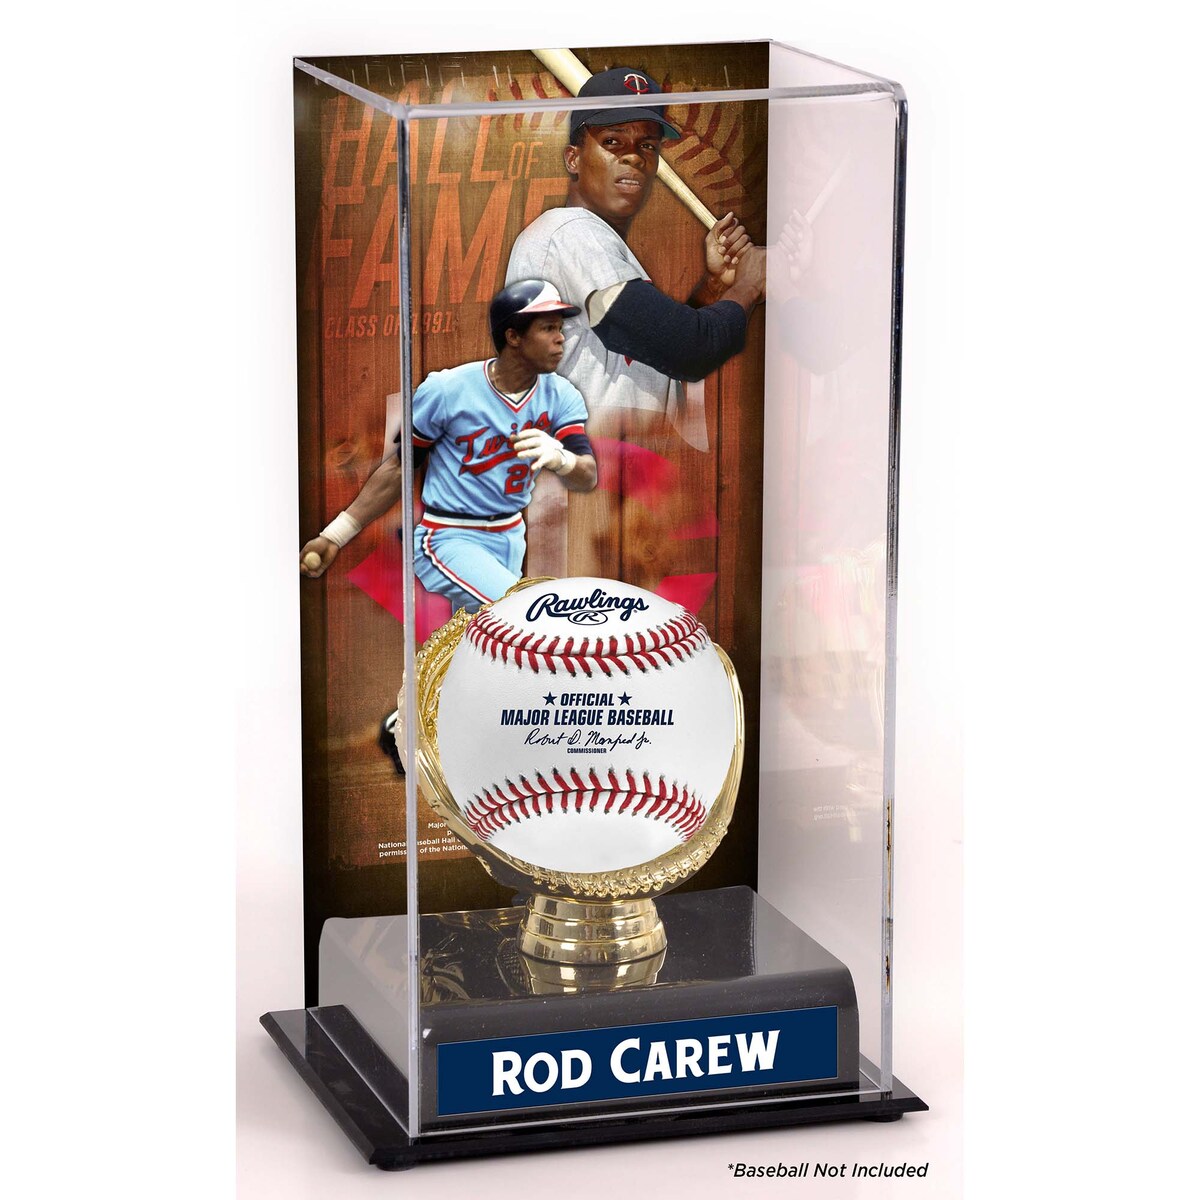 Commemorate a Minnesota Twins legend with this Rod Carew sublimated display case with an image. It showcases the Hall of...